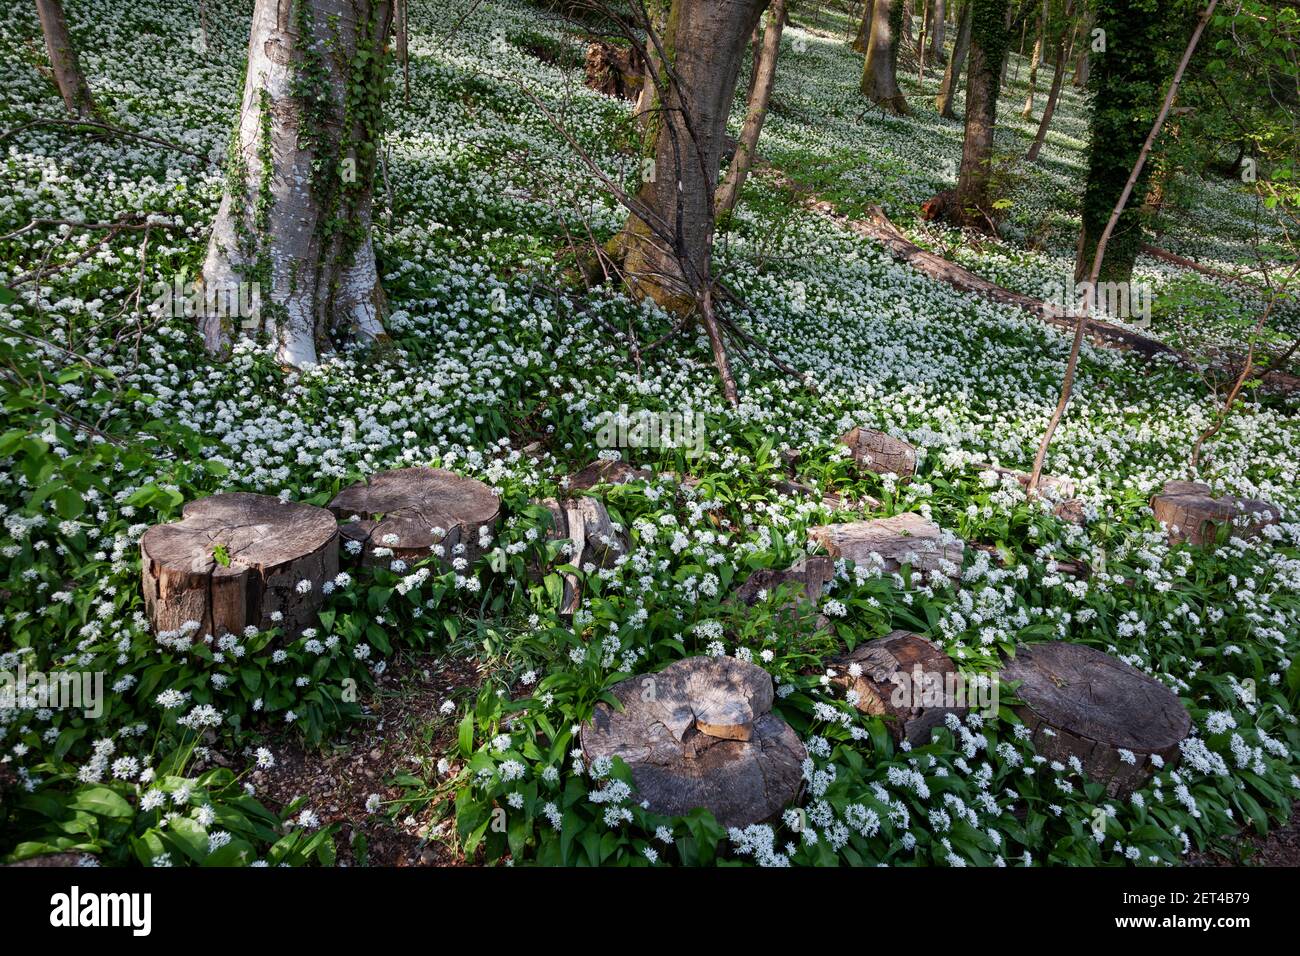 Sawn logs lying in swathes of wild garlic in woodland of the Cotswolds near Stroud, Gloucestershire, UK Stock Photo